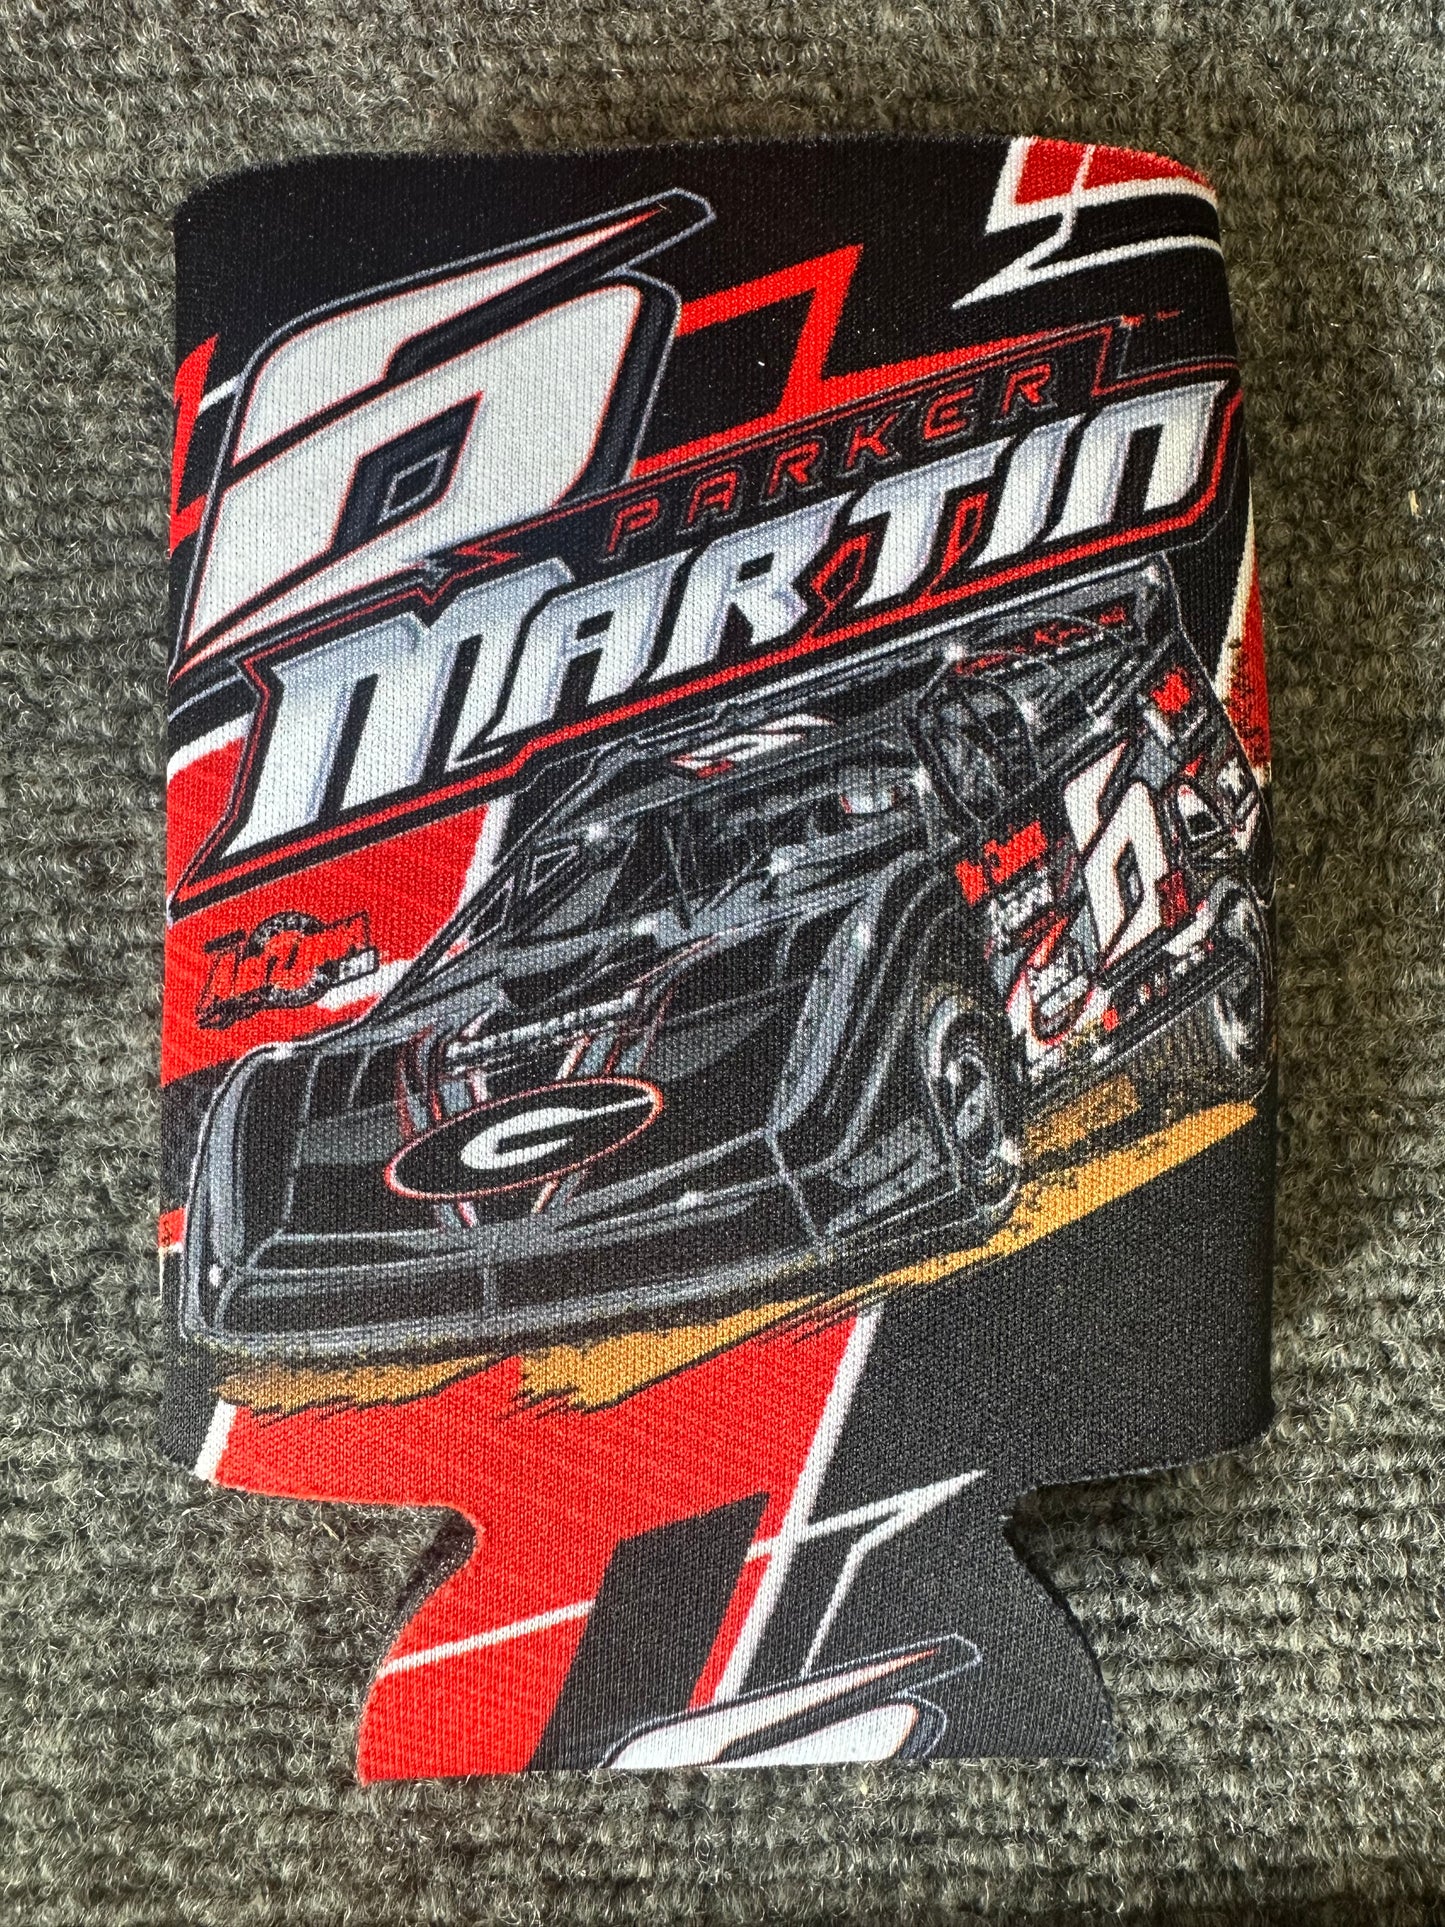 Parker Martin #6JR Coozies